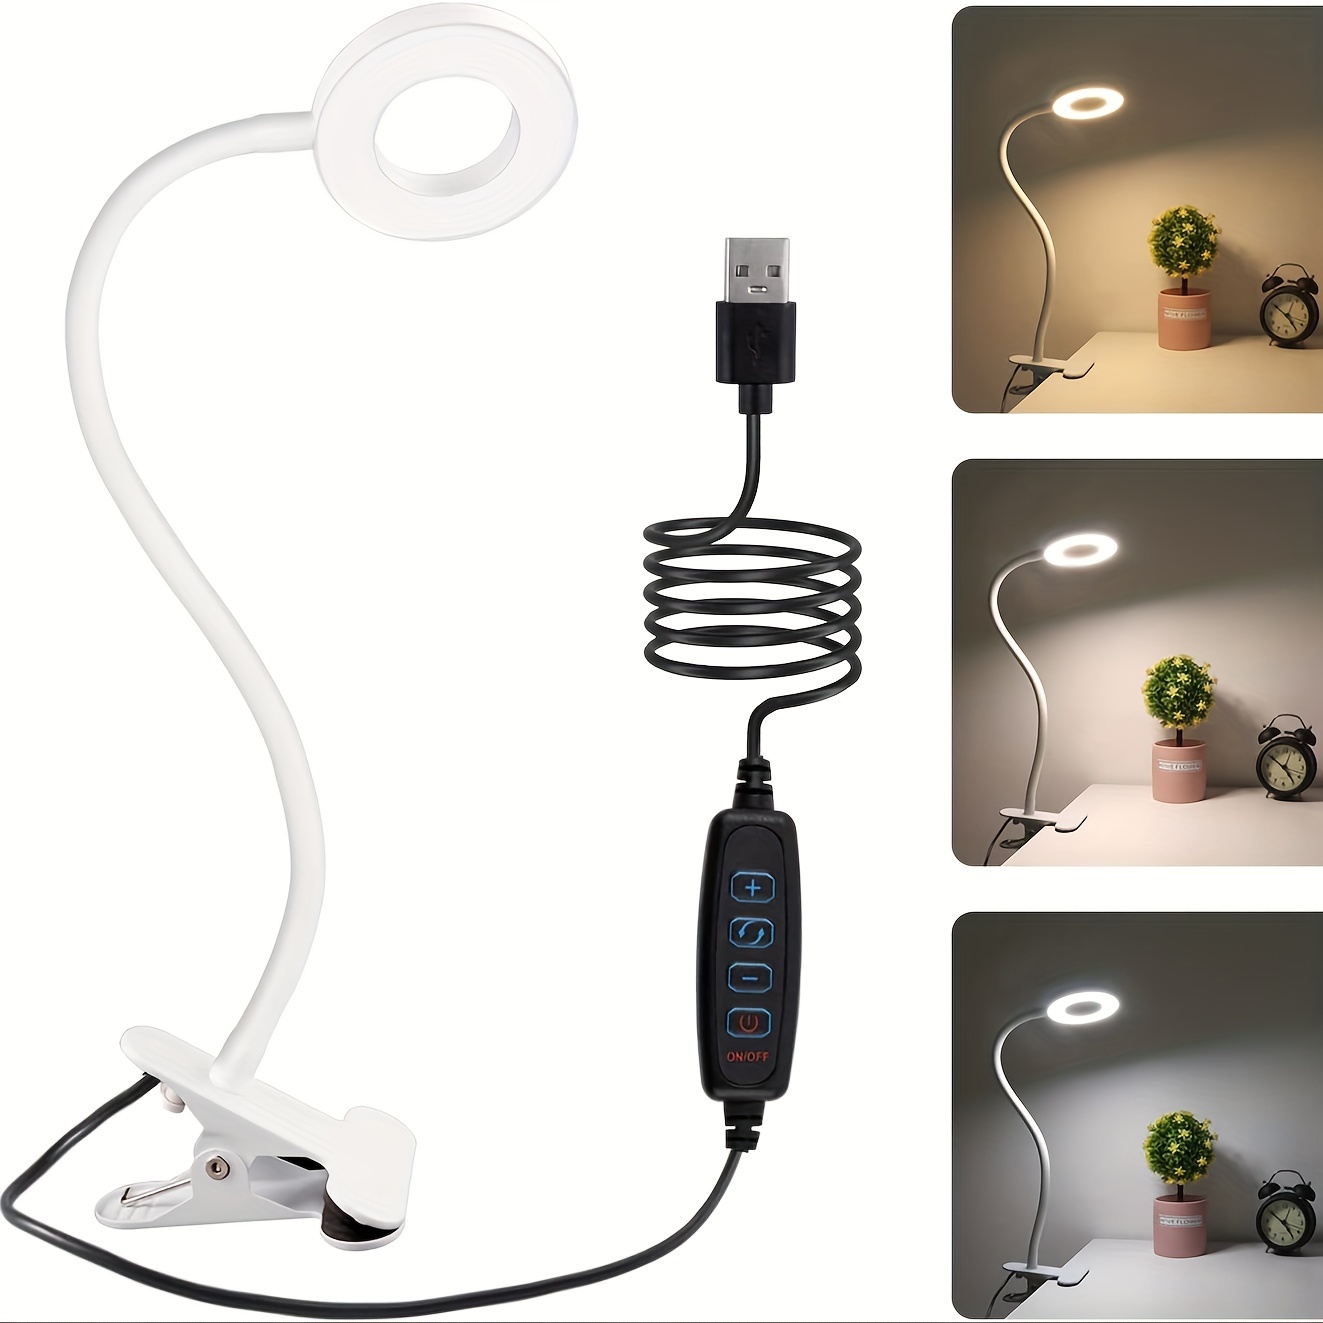 

Flexible Clip-on Led Reading Light With 48 Lights, 3 Color Modes & 10 Brightness Levels - Usb Powered Desk Lamp For Bedroom Usb Convenience In Every Room